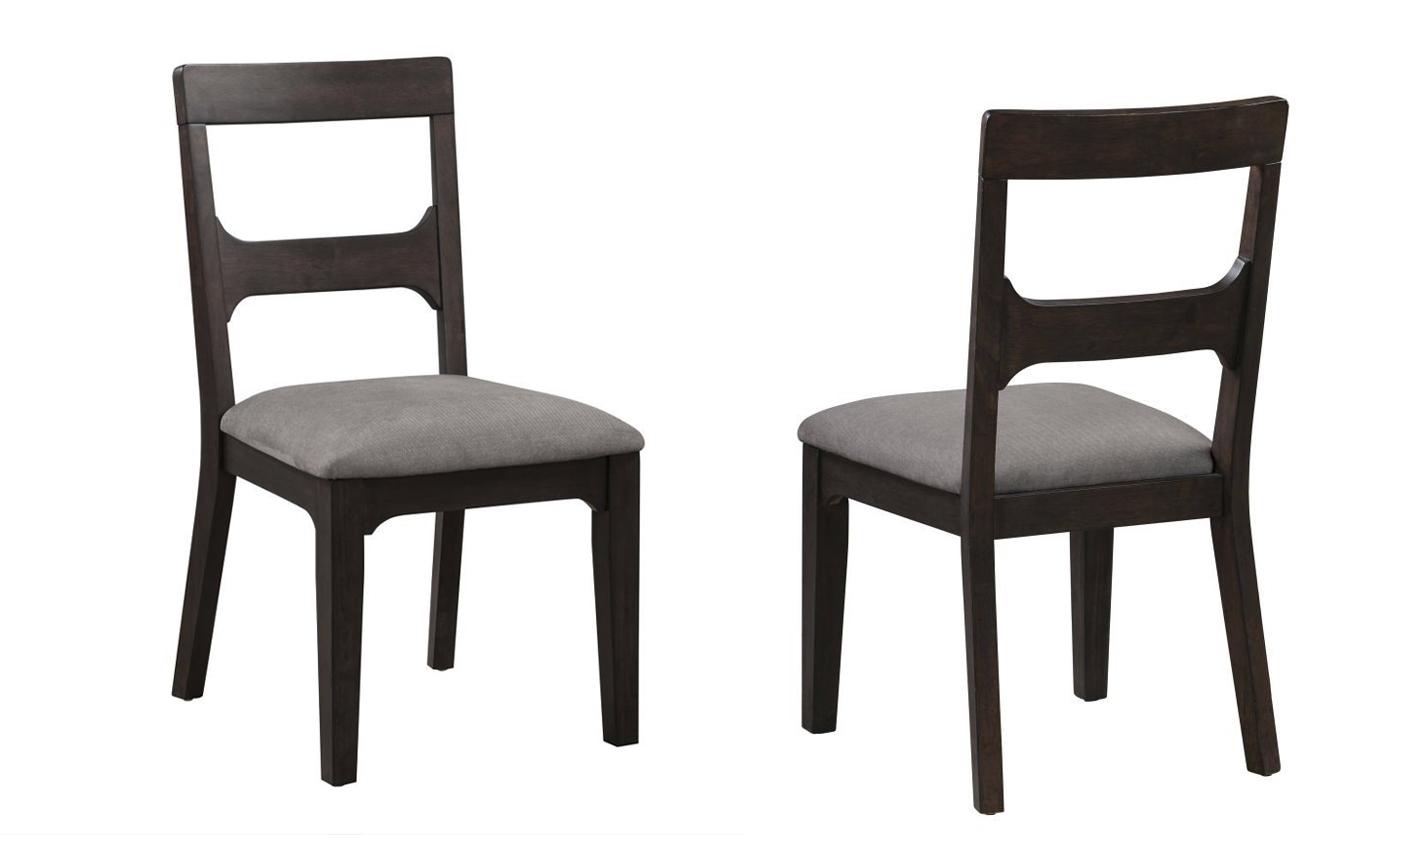 

    
Brown Horse Finish Mid-century Style Dining Chair Set 2Pcs BRYCE by Modus Furniture
